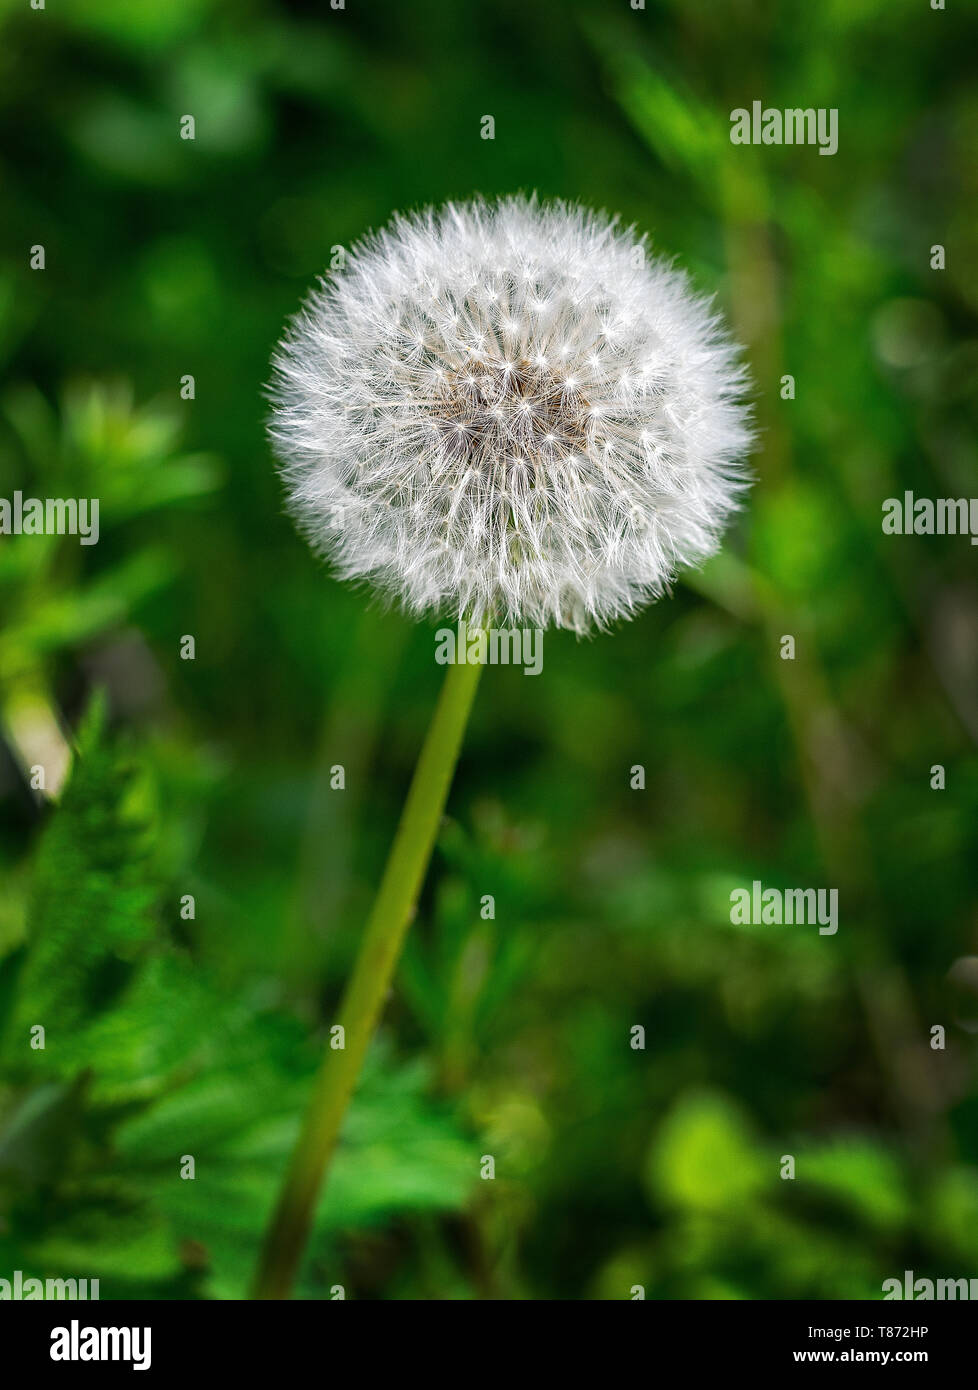 A dandelion seed head in its mature state before it's disturbed and blown away by the wind Stock Photo